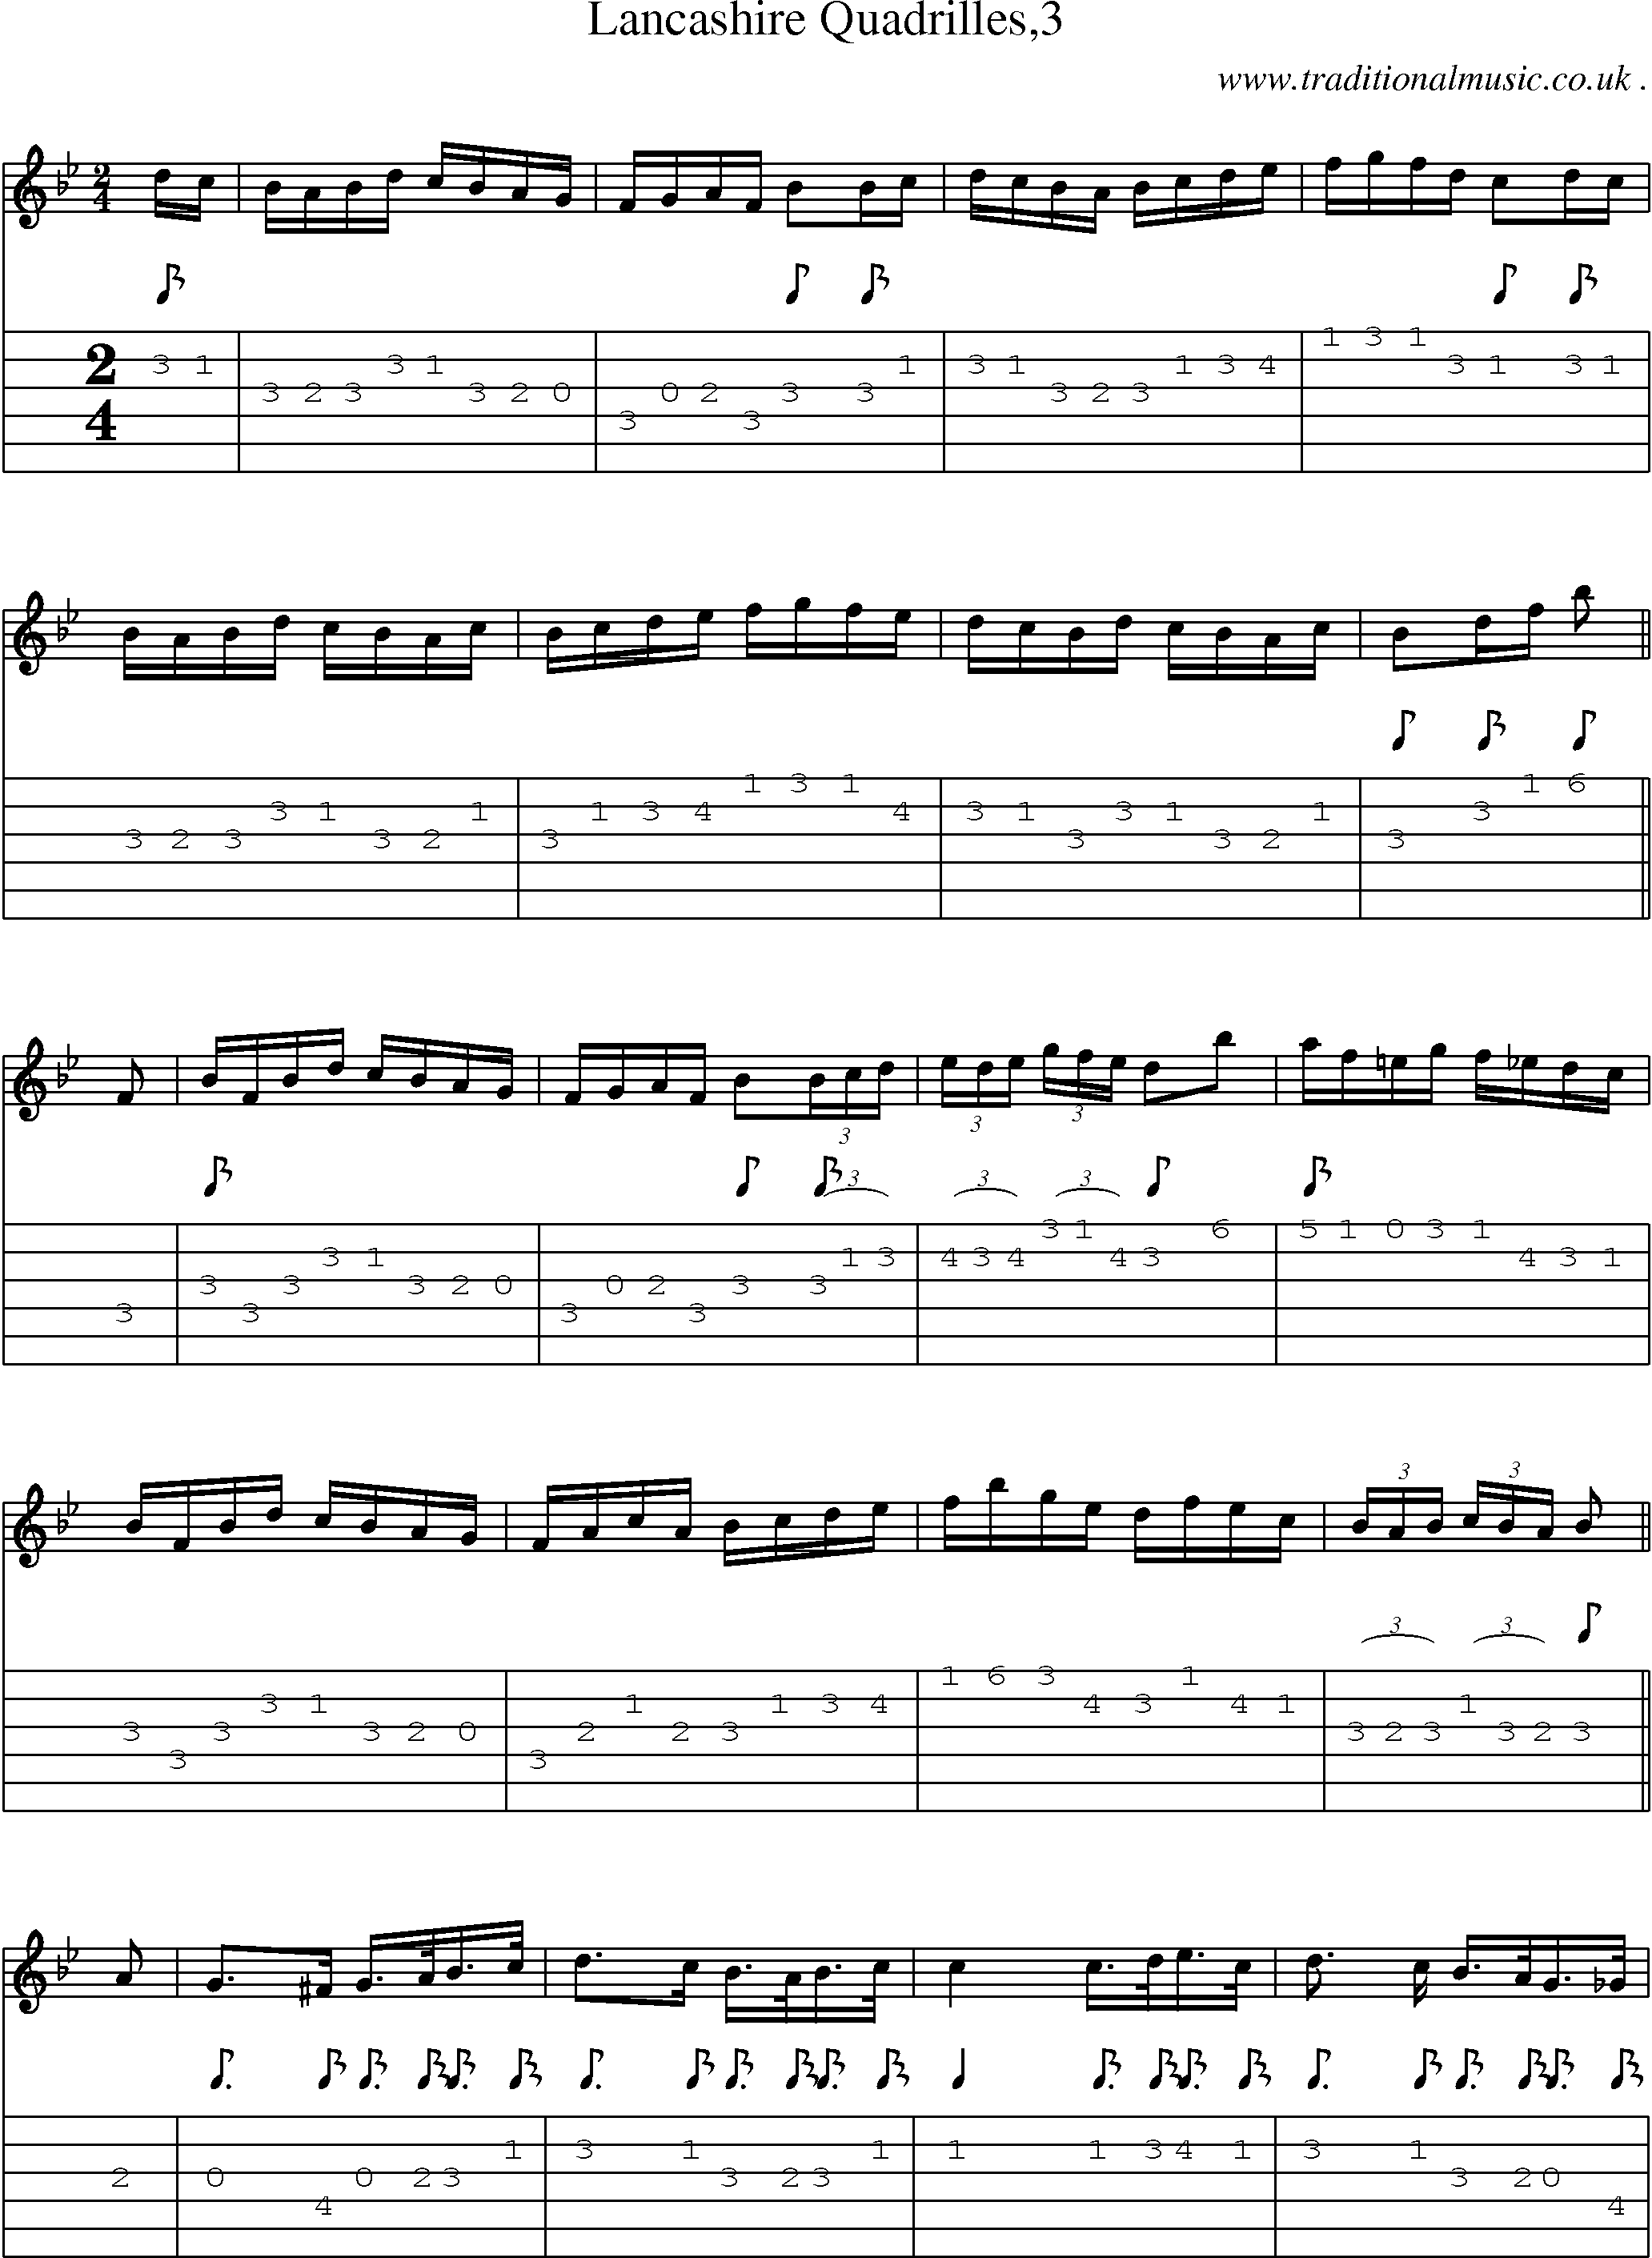 Sheet-Music and Guitar Tabs for Lancashire Quadrilles3